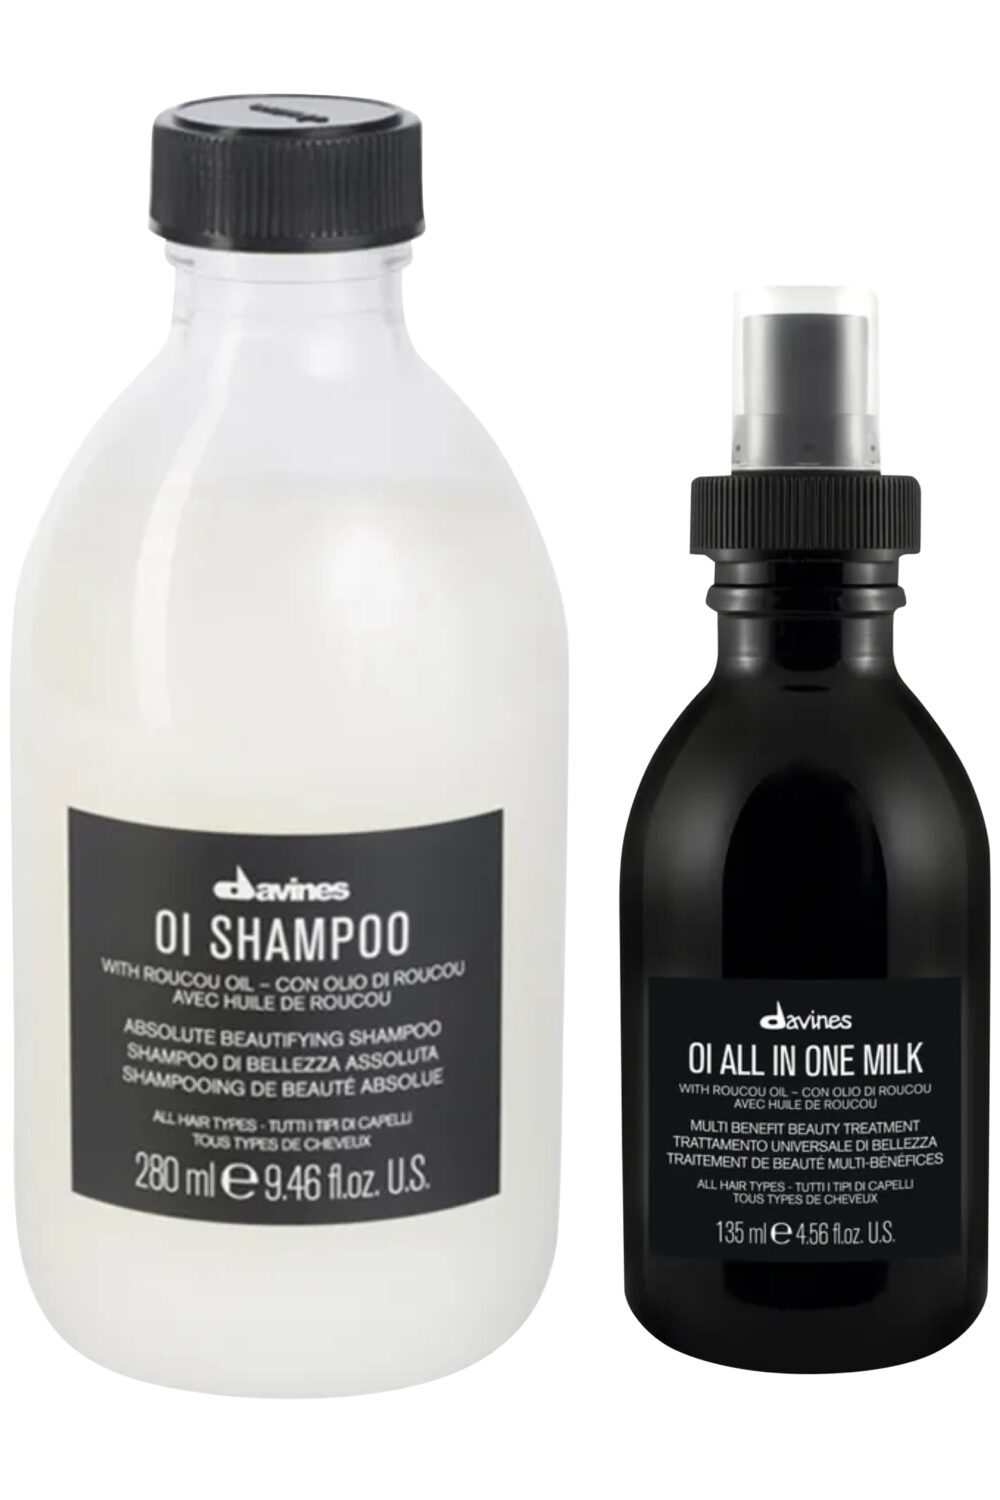 Davines - Duo shampoing et soin multi-fonctions OI